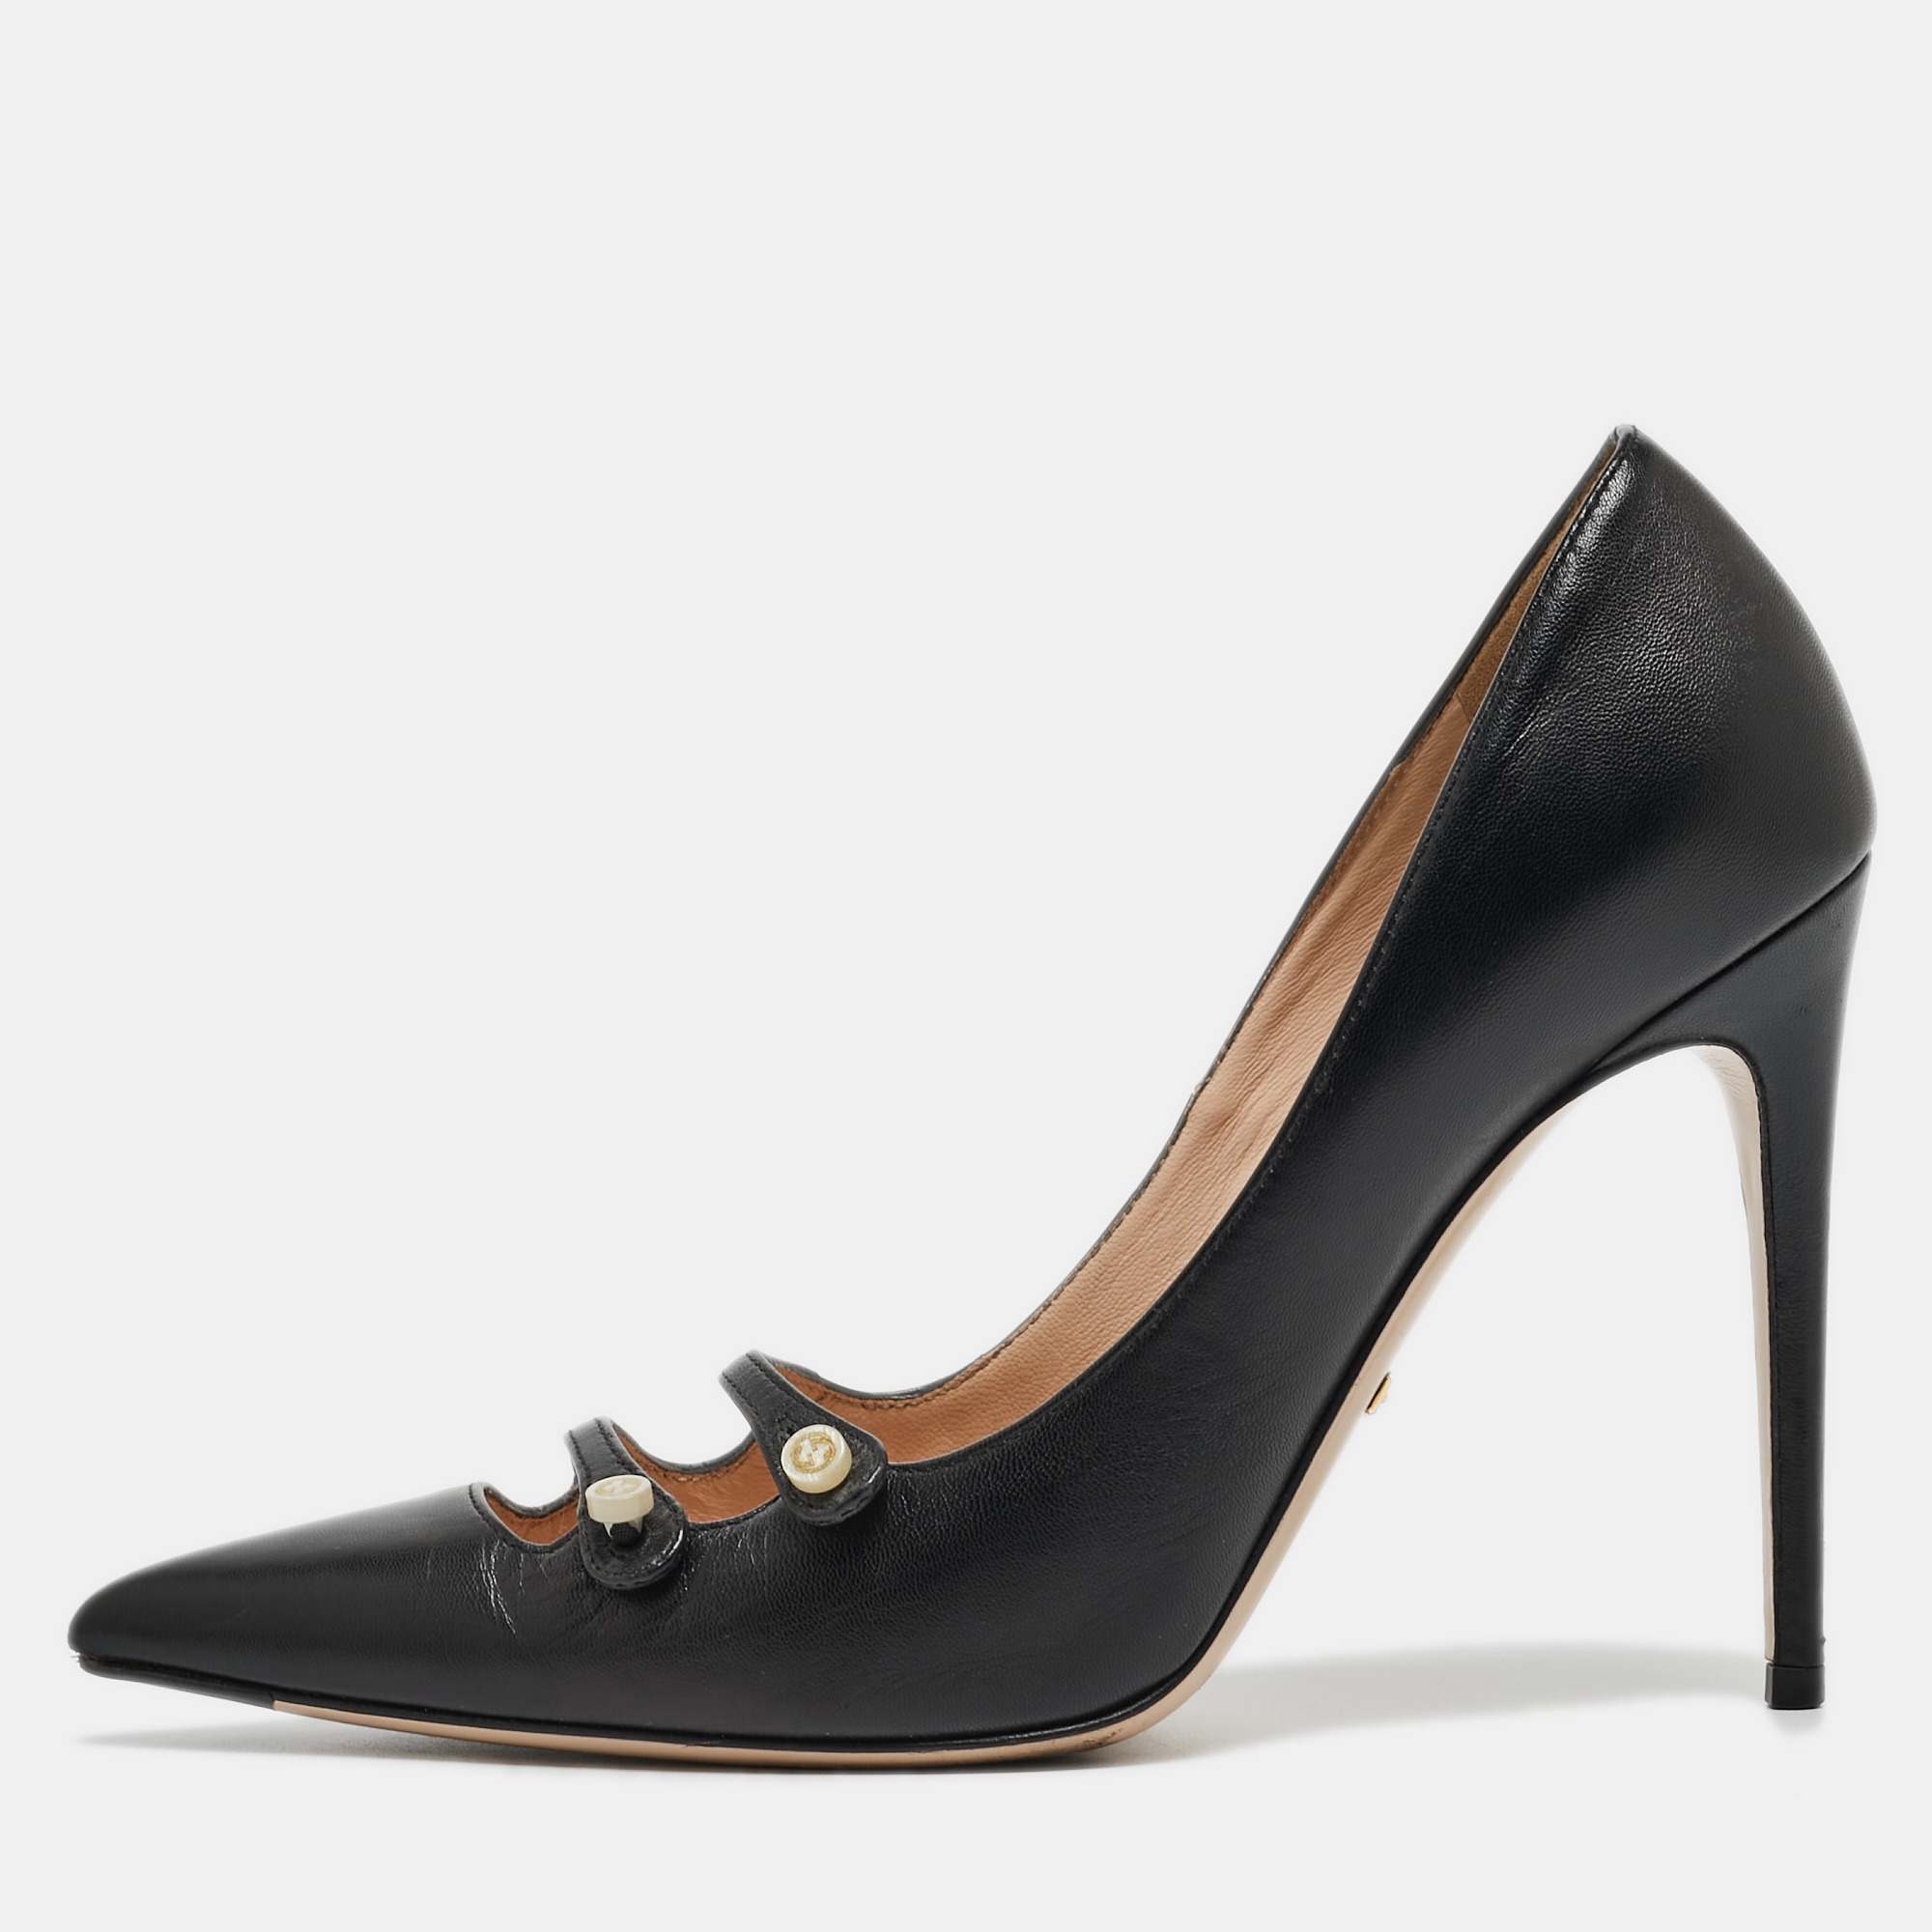 Gucci black leather aneta pointed pumps size 37